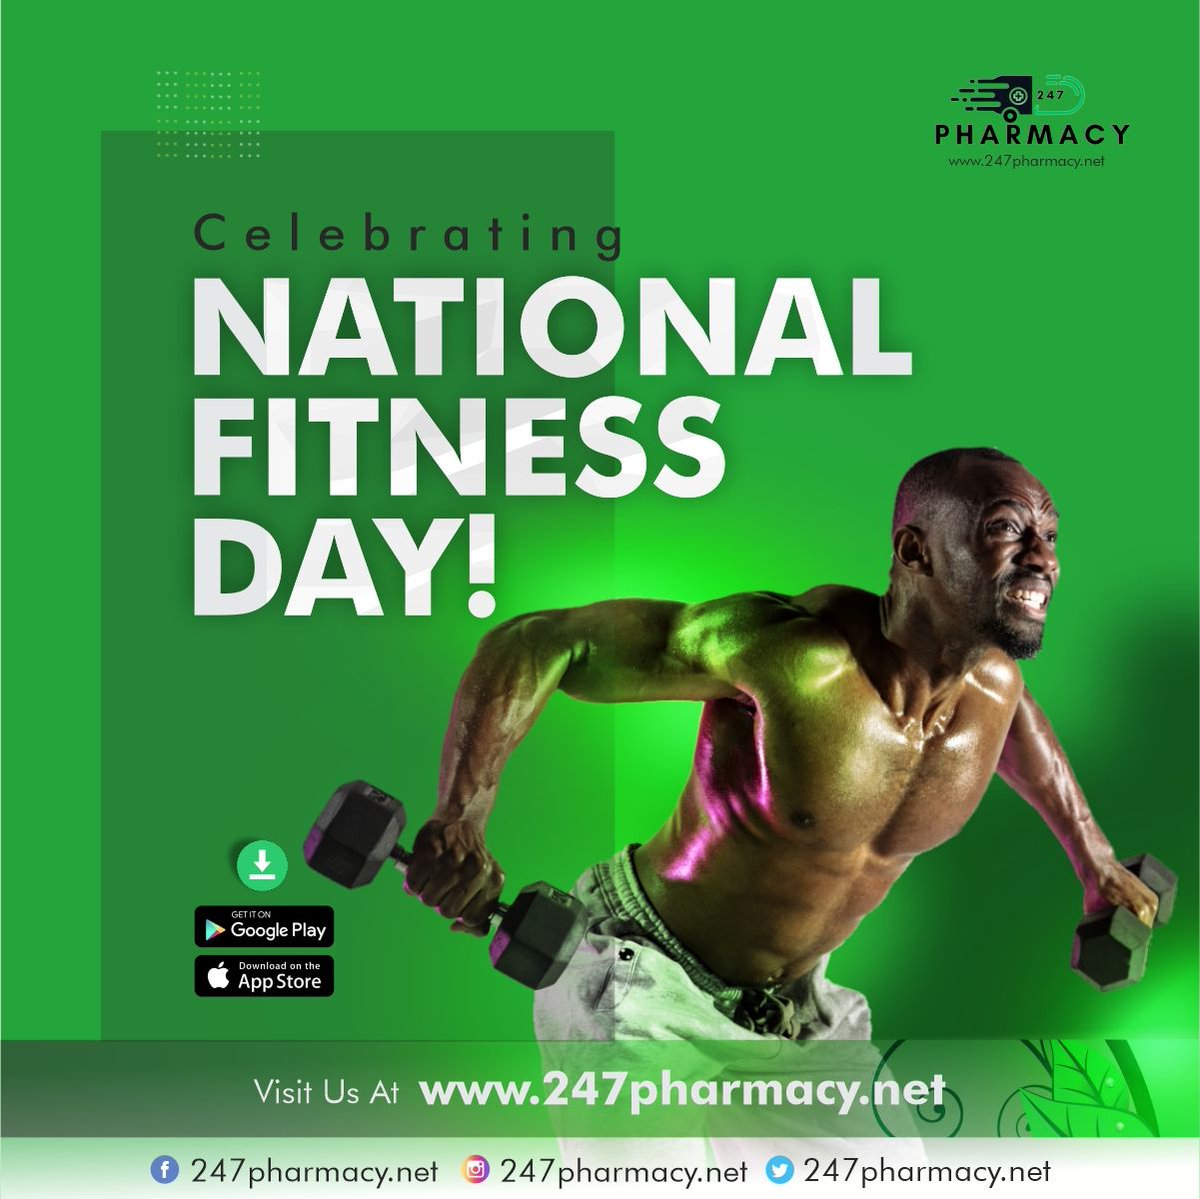 Celebrating National Fitness Day!

Stay active and keep fit for a healthier you. Explore our range of fitness and wellness products to support your journey.

#Fitness #nationalfitnessday #stayactive #healthylifestyle #247pharmacy